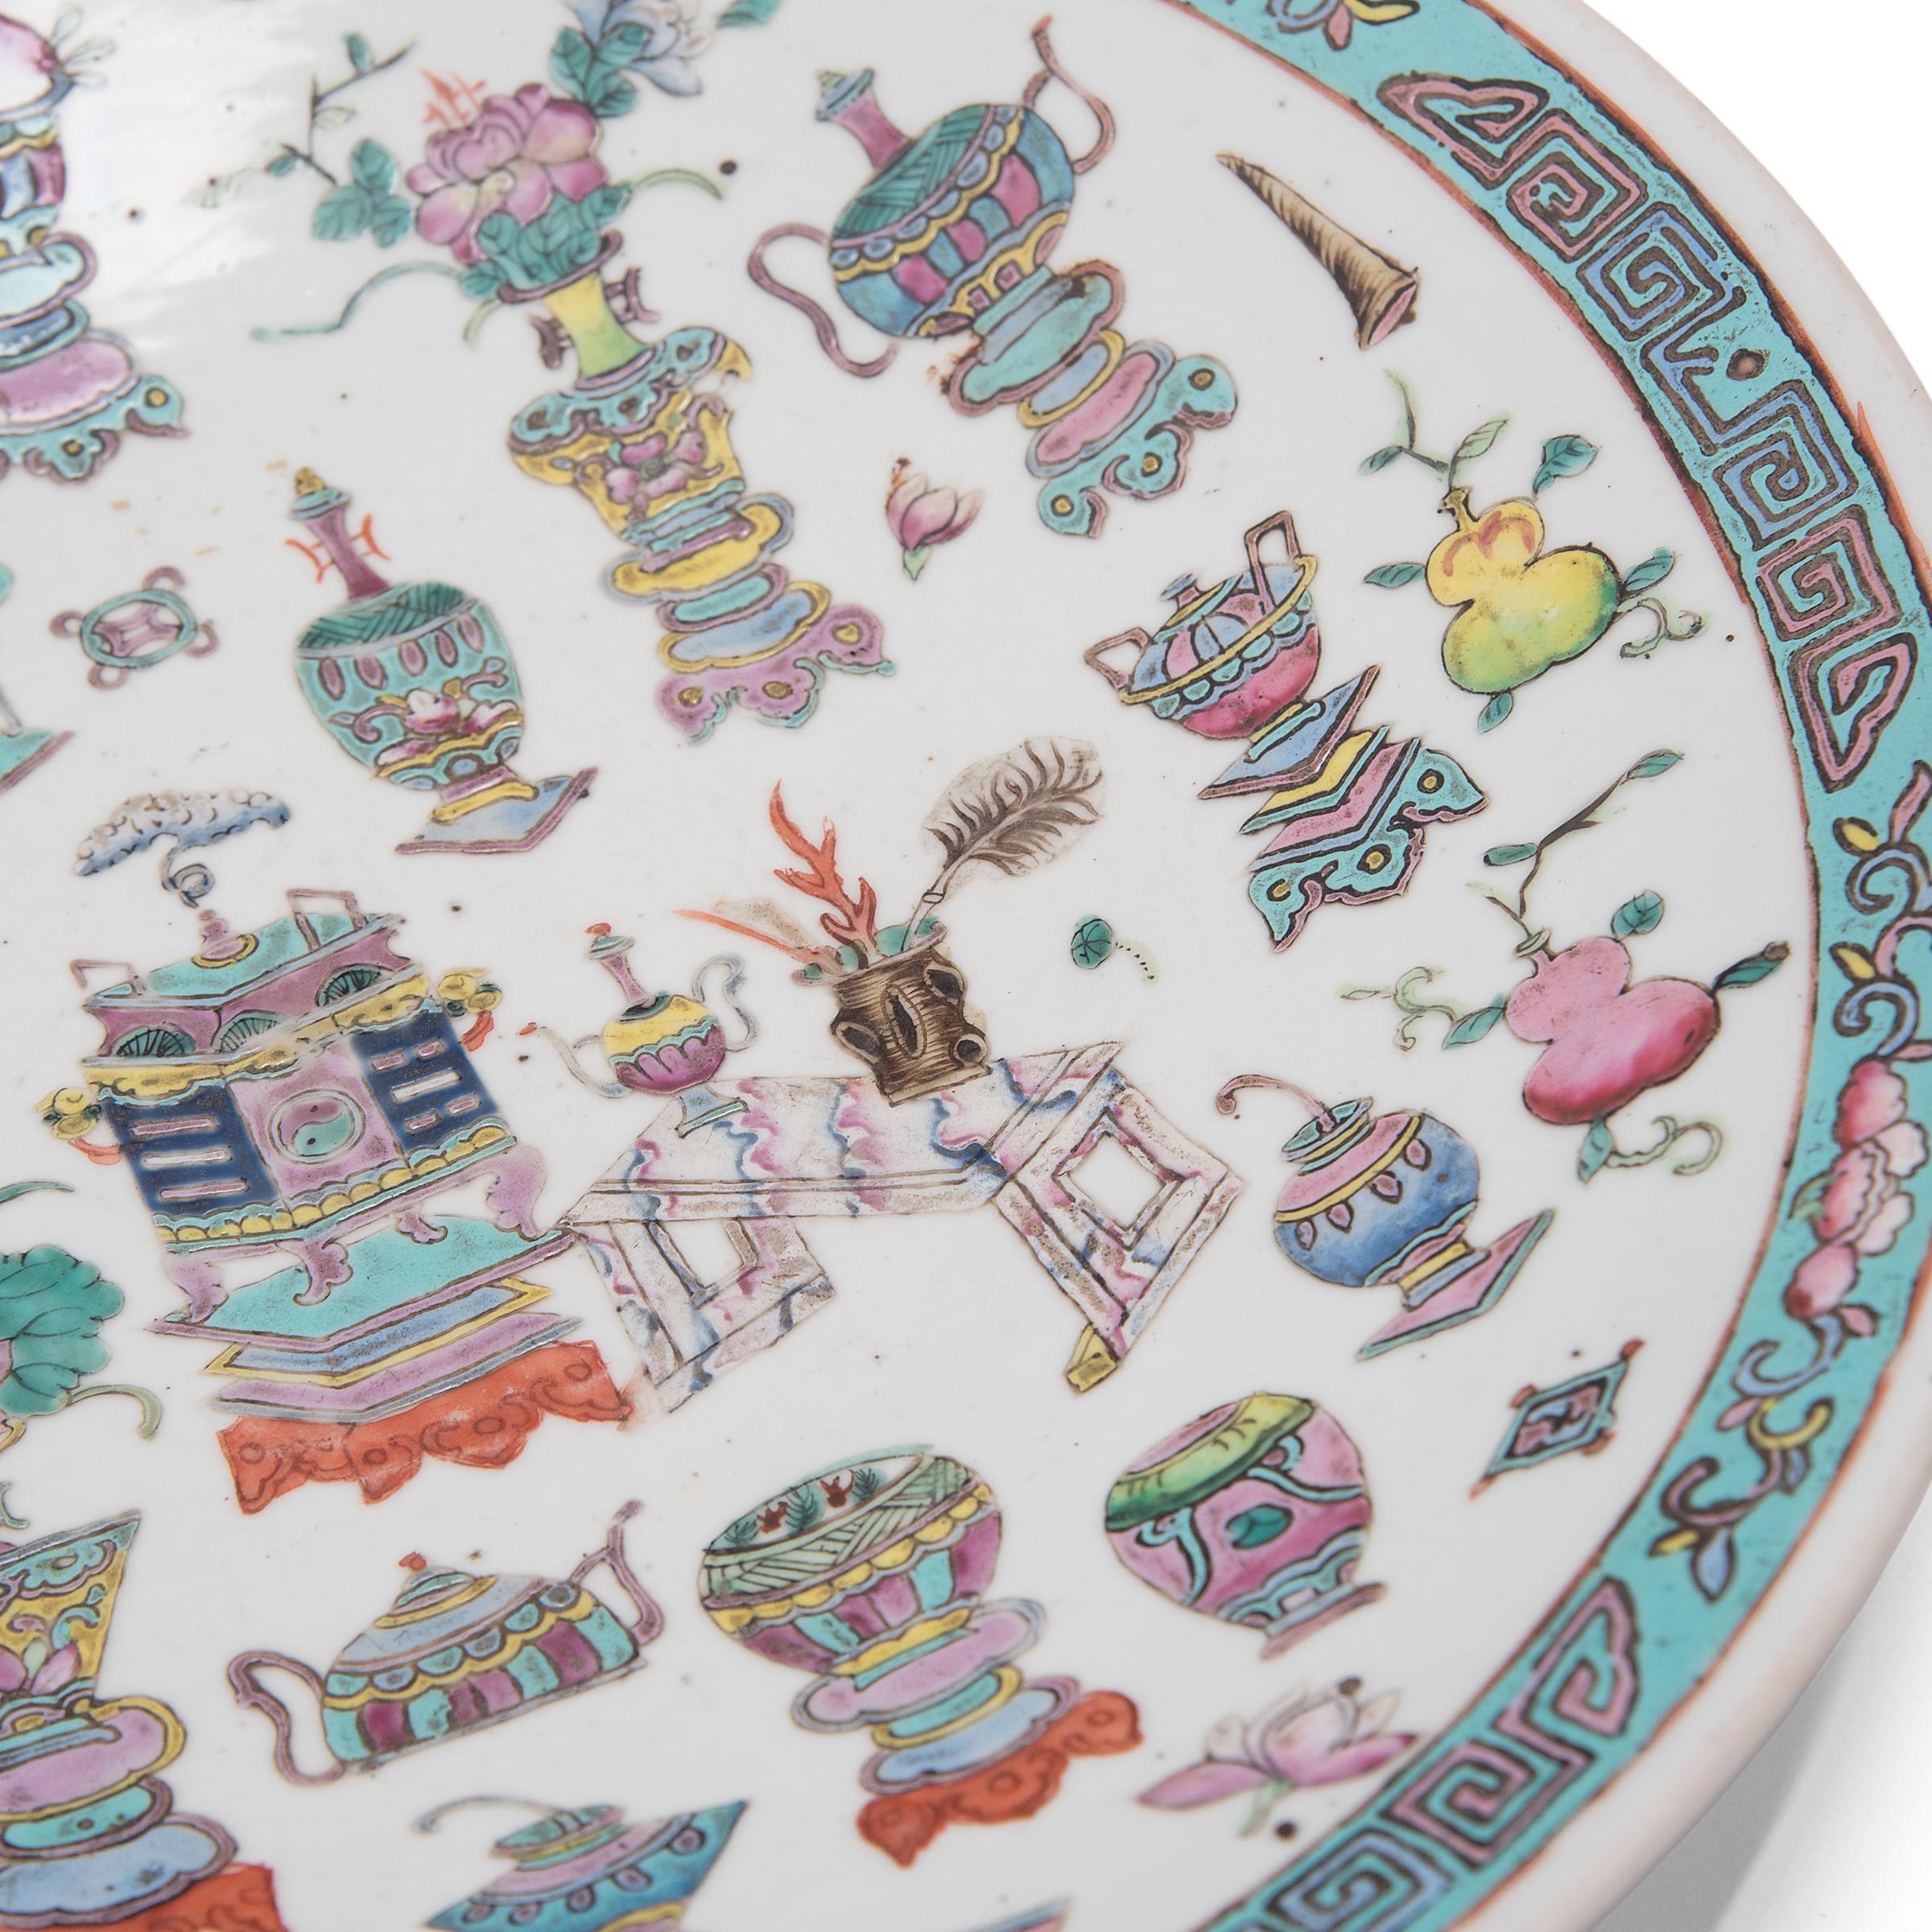 Enameled Chinese Famille Rose Dish with Scholars' Objects, c. 1900